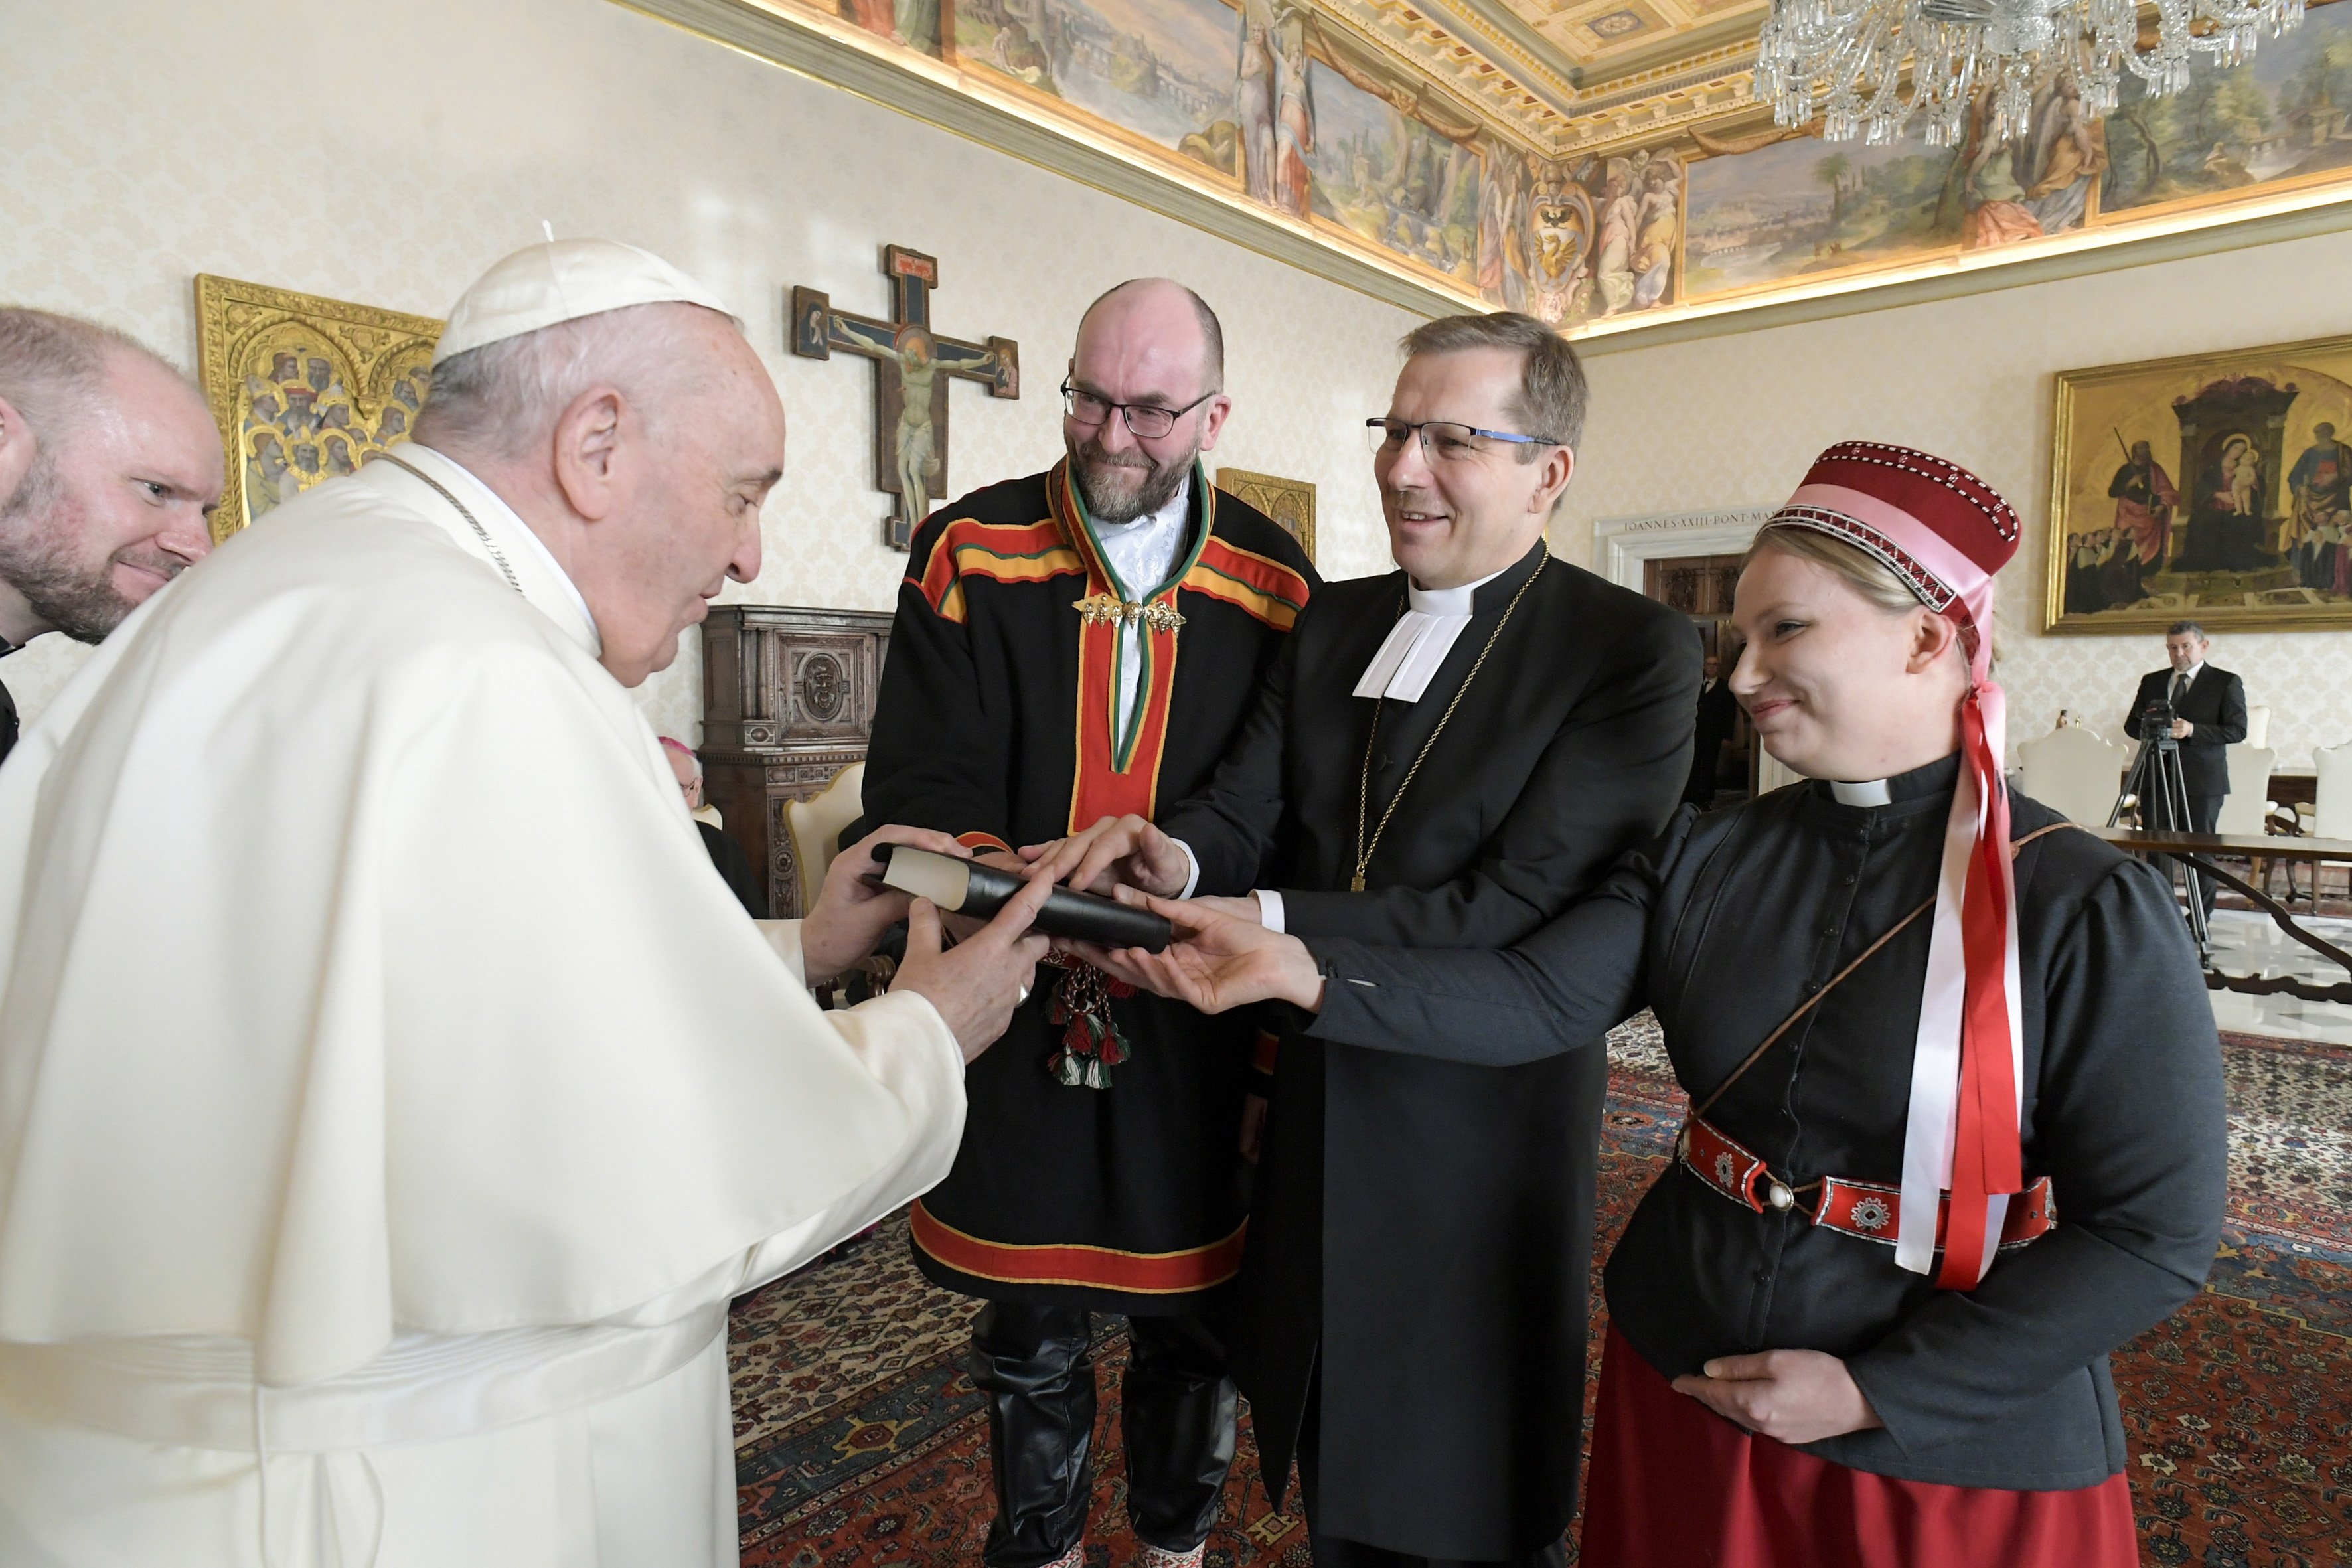 Pope Francis accepts a gift during an audience with an ecumenical delegation from Finland at the Vatican Jan. 17, 2022.  (CNS photo/Vatican Media)